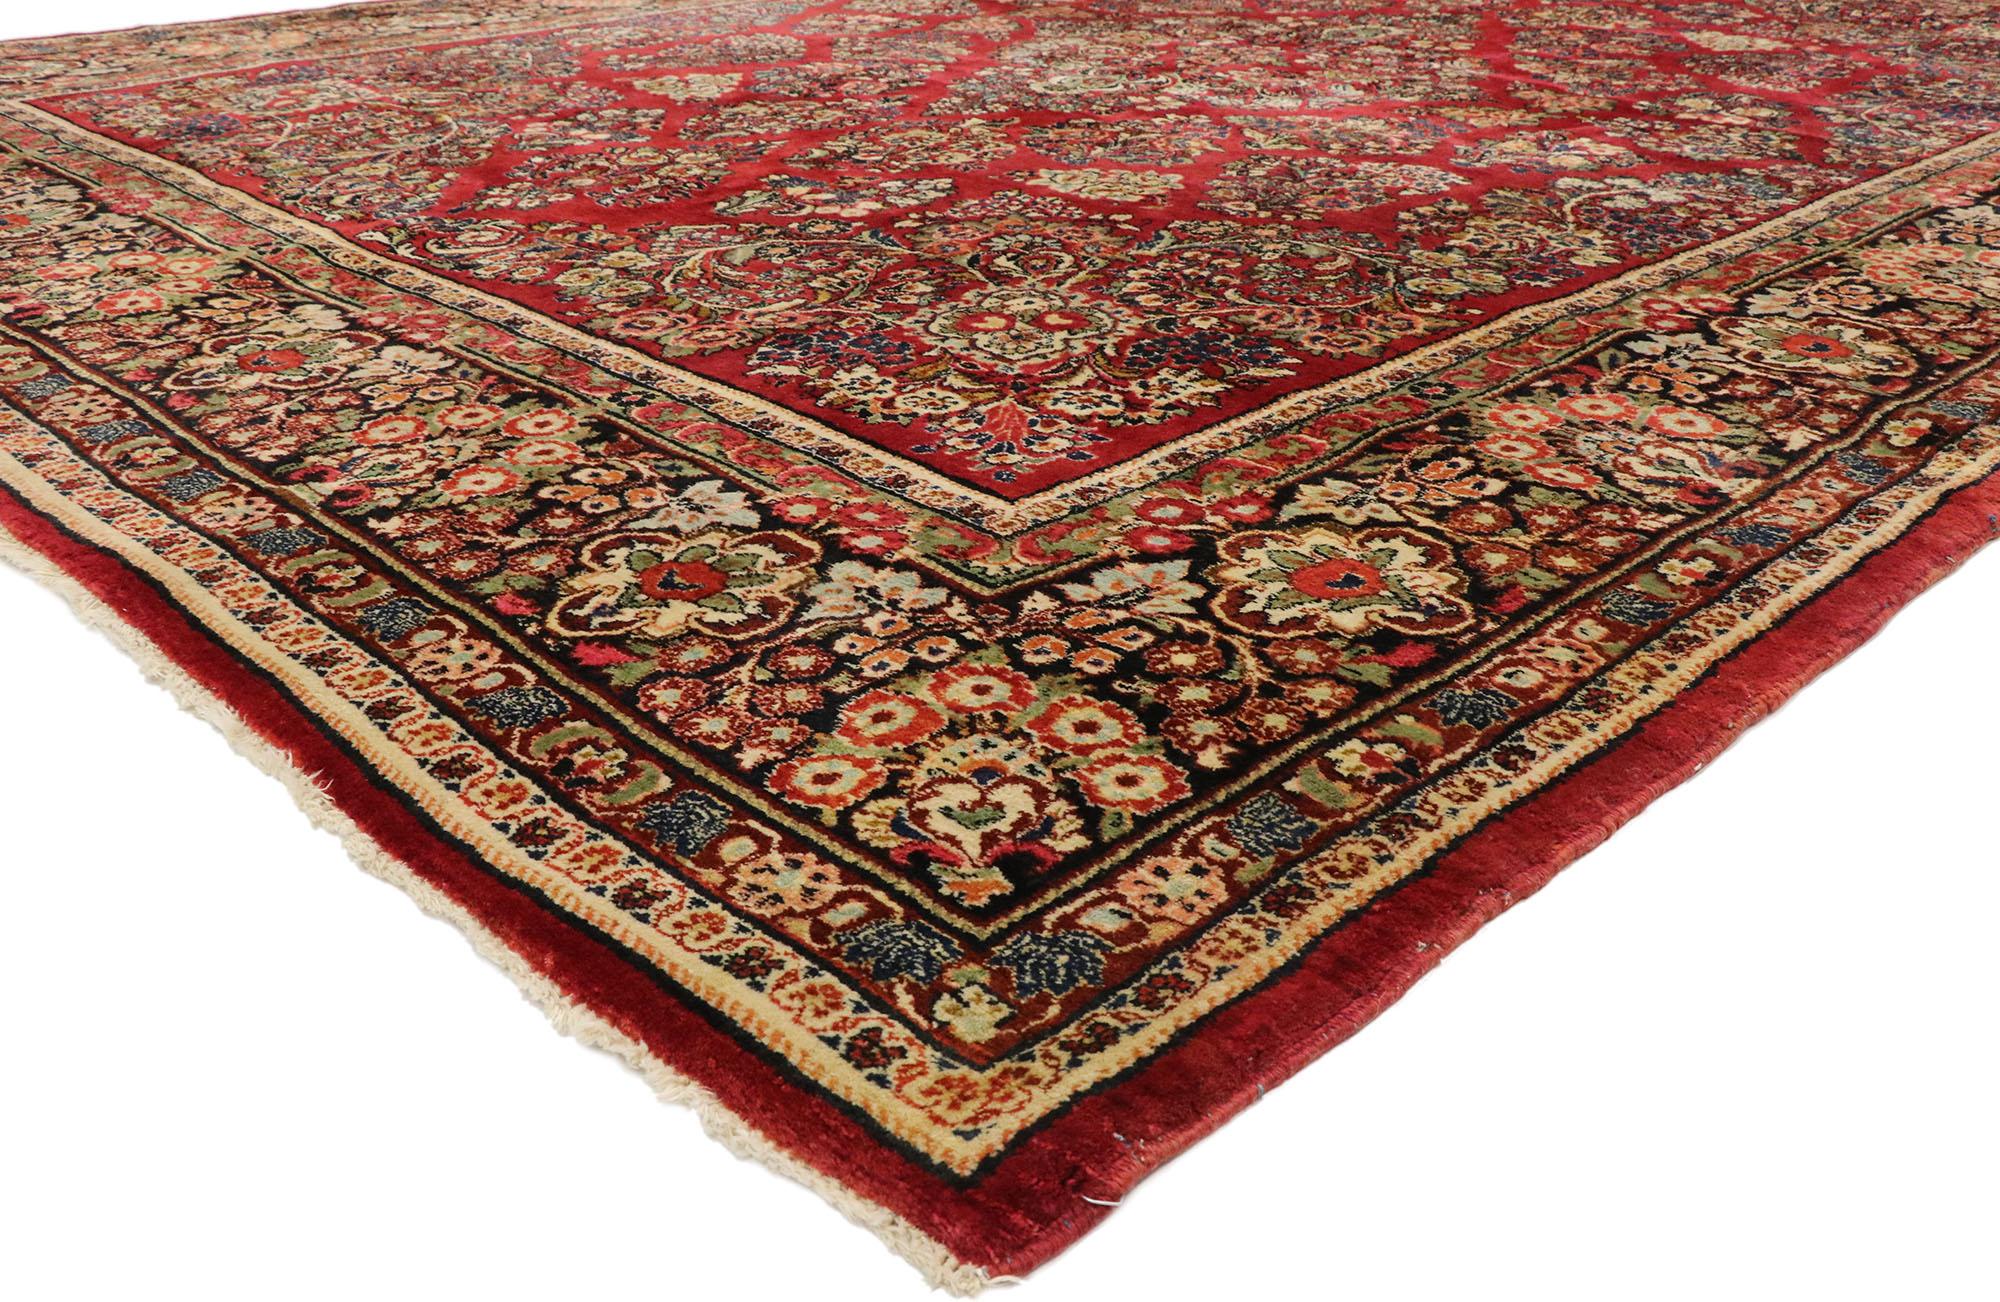 72908, vintage Persian Sarouk rug with traditional English Tudor Manor style 10'01 x 1306.?? With timeless appeal, refined colors, and architectural design elements, this hand knotted wool antique Persian Sarouk rug can beautifully blend modern,